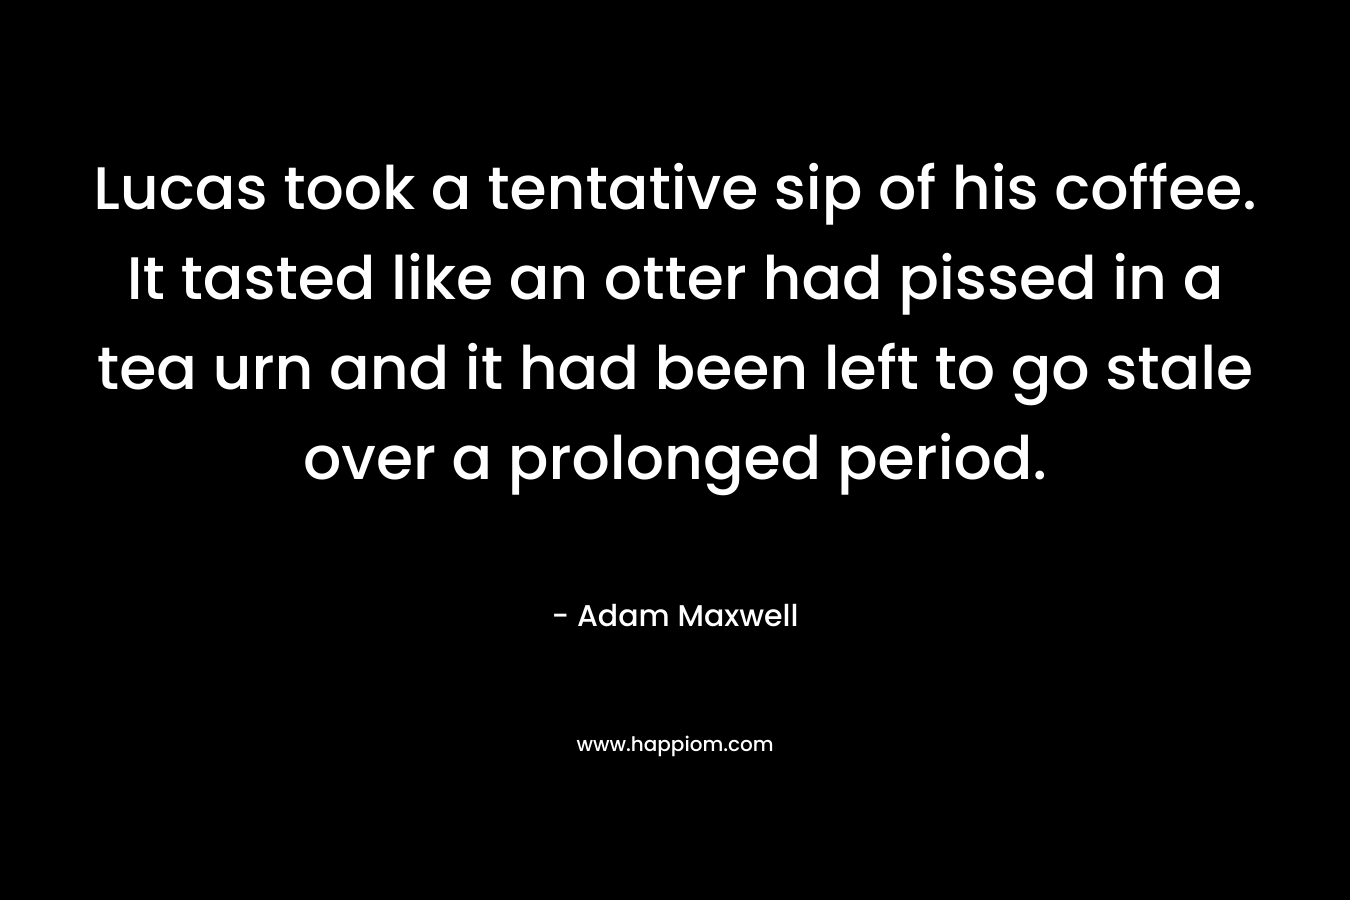 Lucas took a tentative sip of his coffee. It tasted like an otter had pissed in a tea urn and it had been left to go stale over a prolonged period. – Adam Maxwell